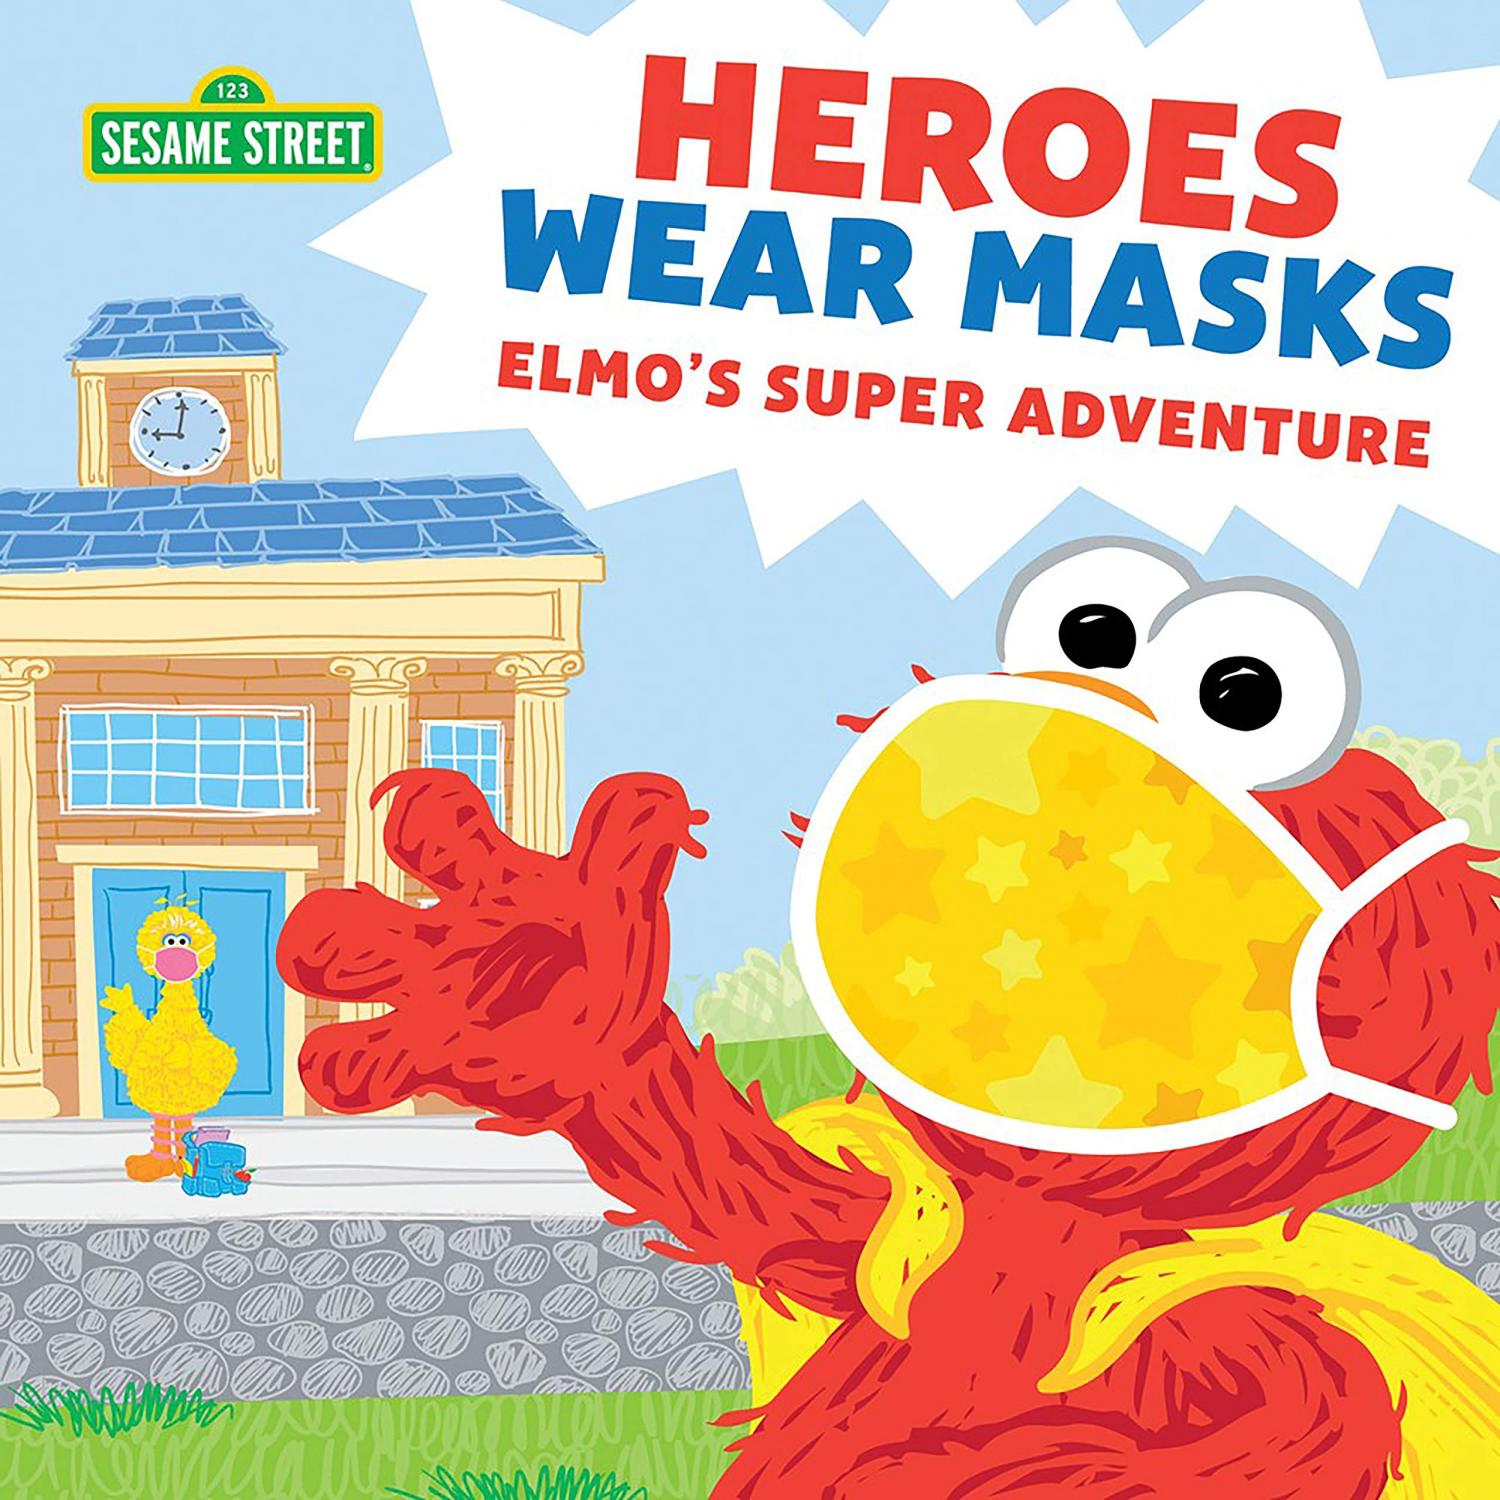 Illustration of Elmo wearing a yellow face mask